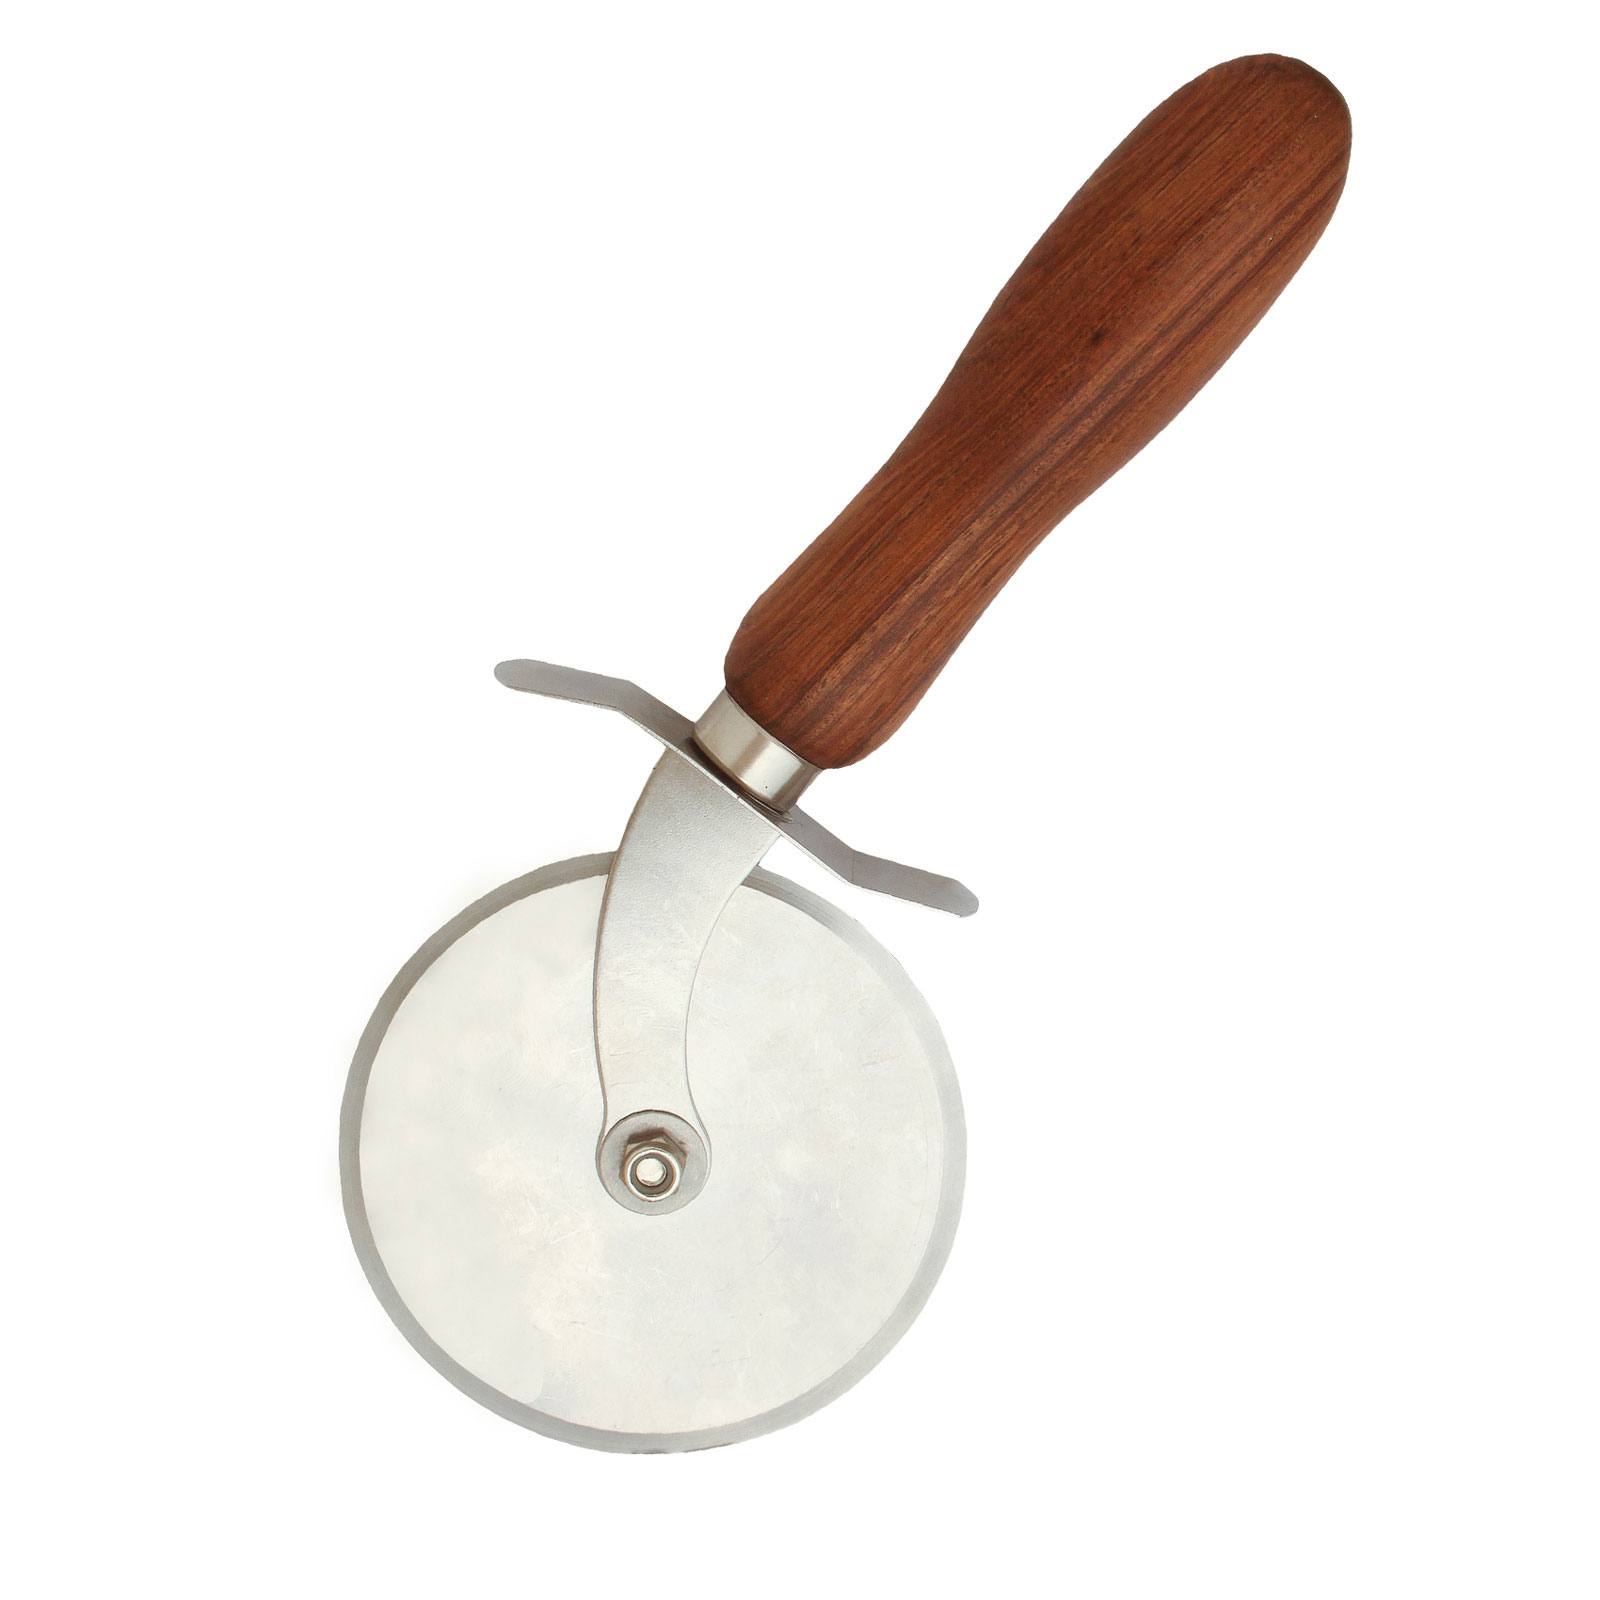 Pizza Stainless Steel Cutter With Wood Handle Durable Blade Rocking Kitchen Tool 